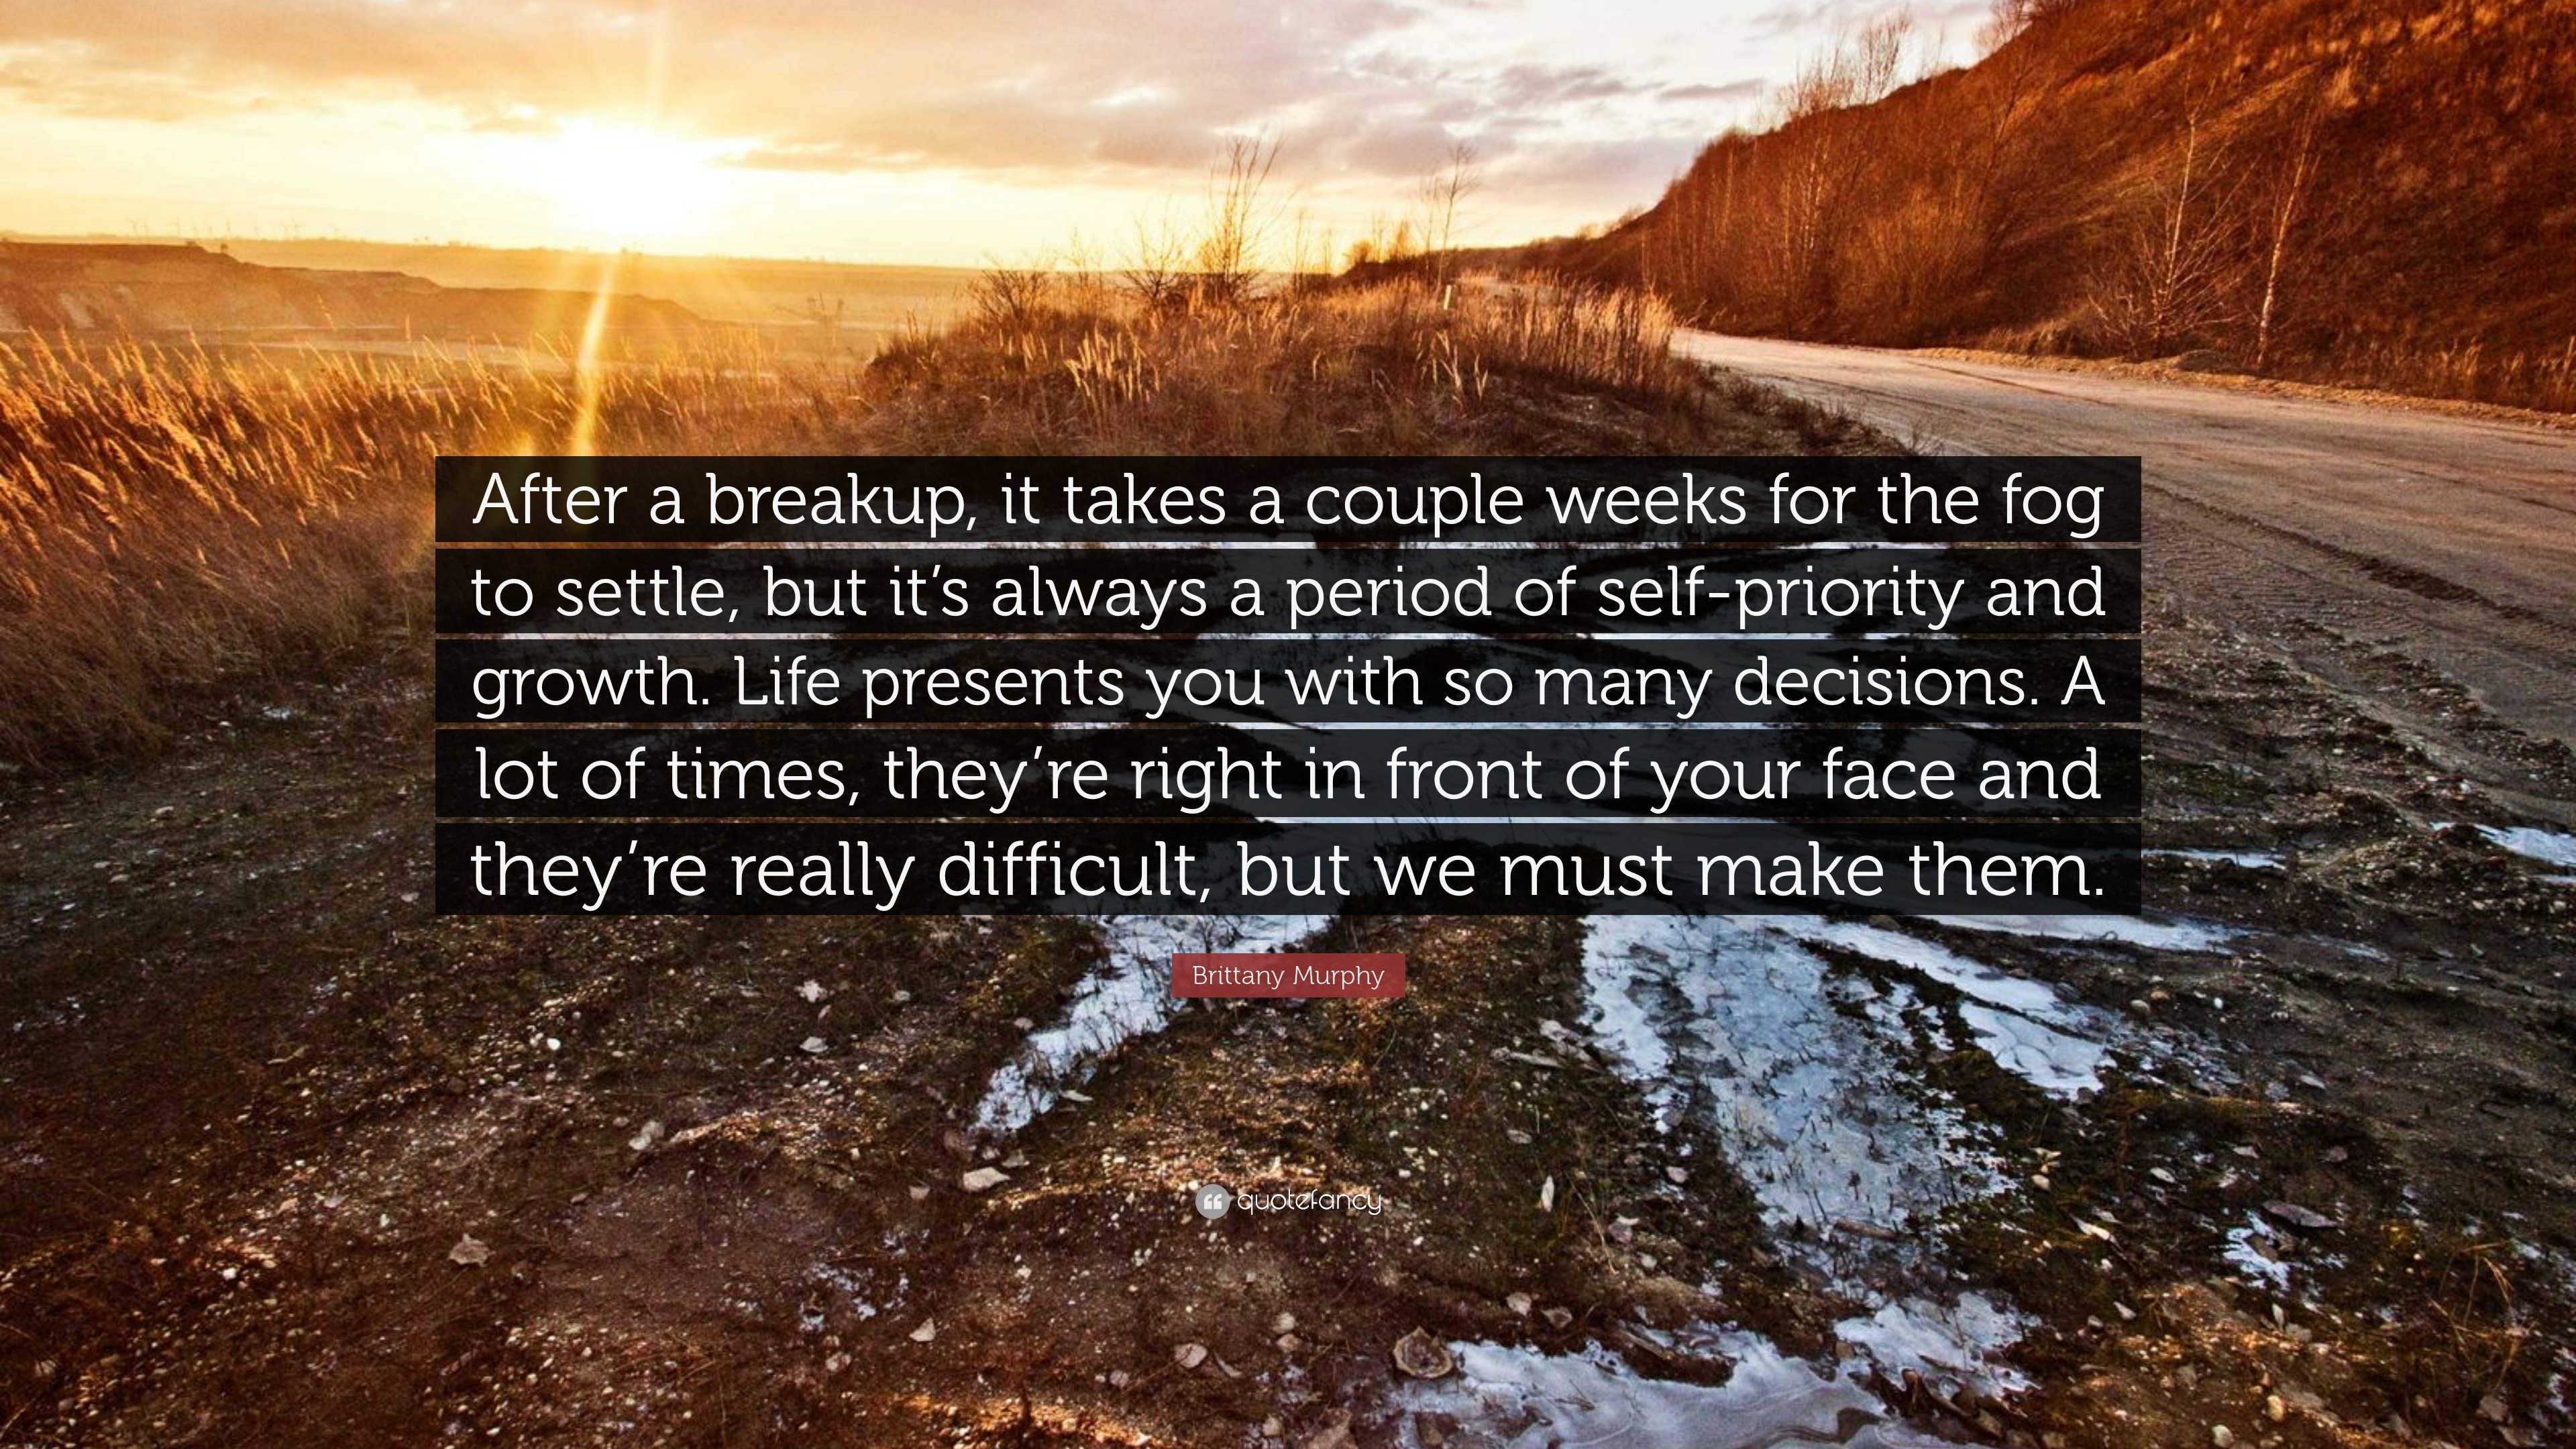 relationship break up quotes for her